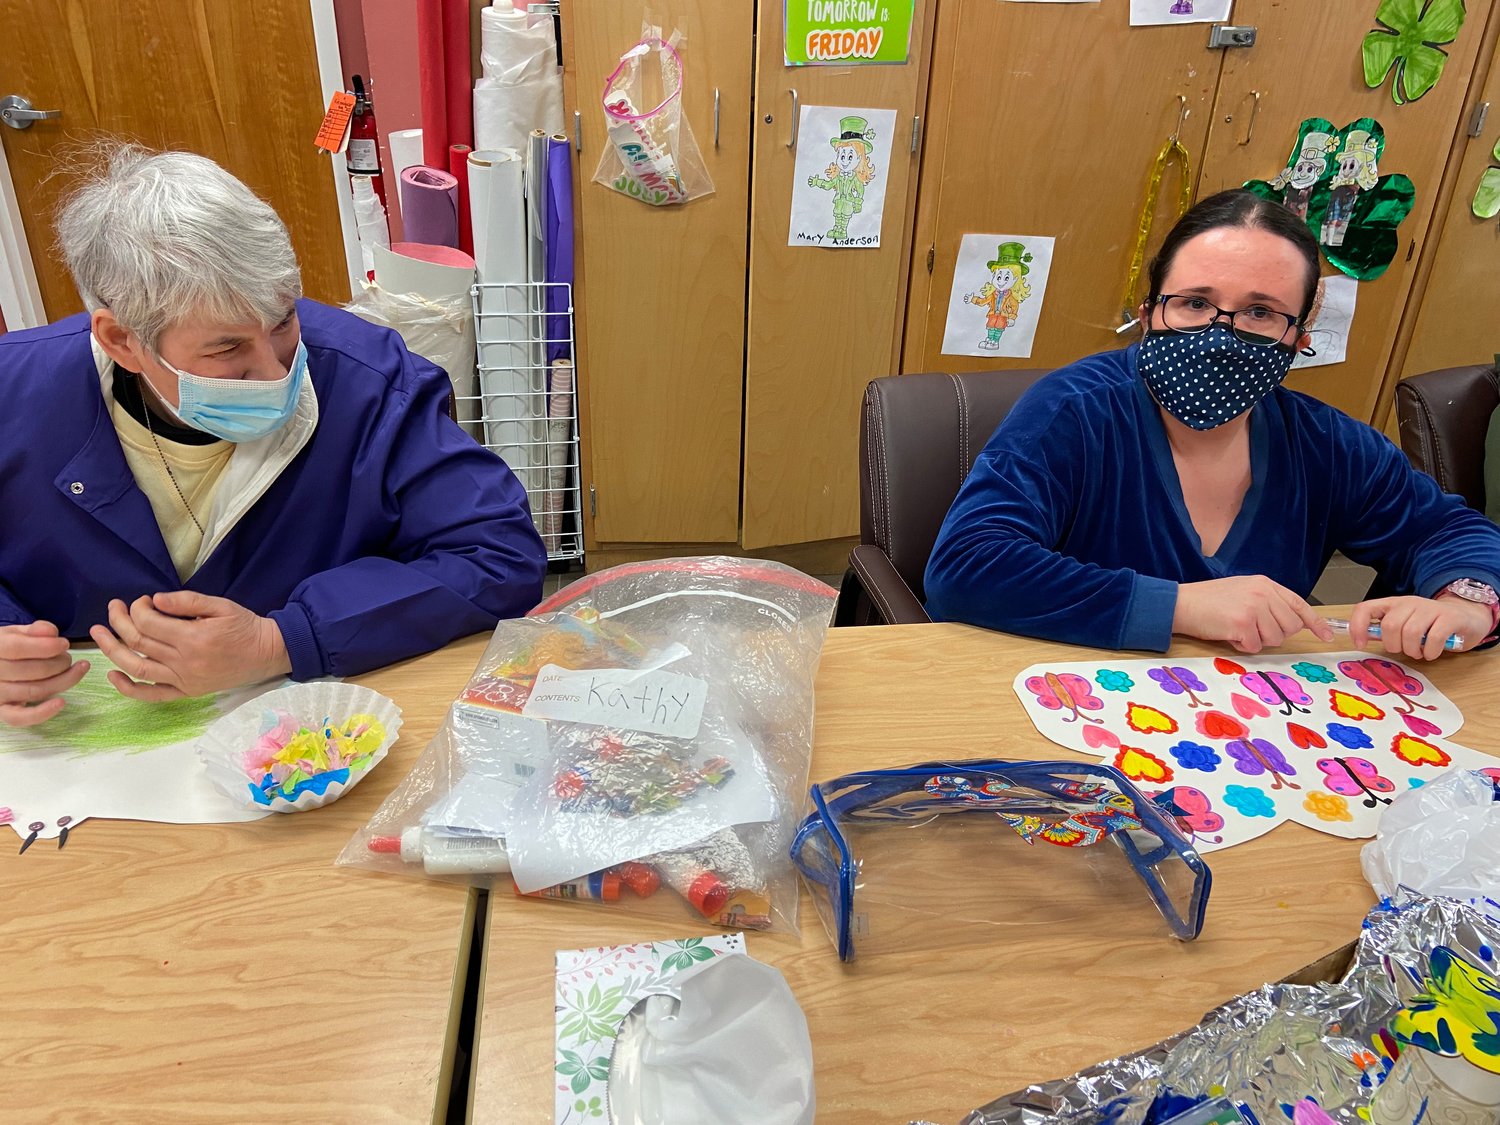 Kathy Staudter, from North Merrick, left and Donna Nowakoski, from Franklin Square, helped create the butterflies that will go in the “Garden of Dreams” exhibit.